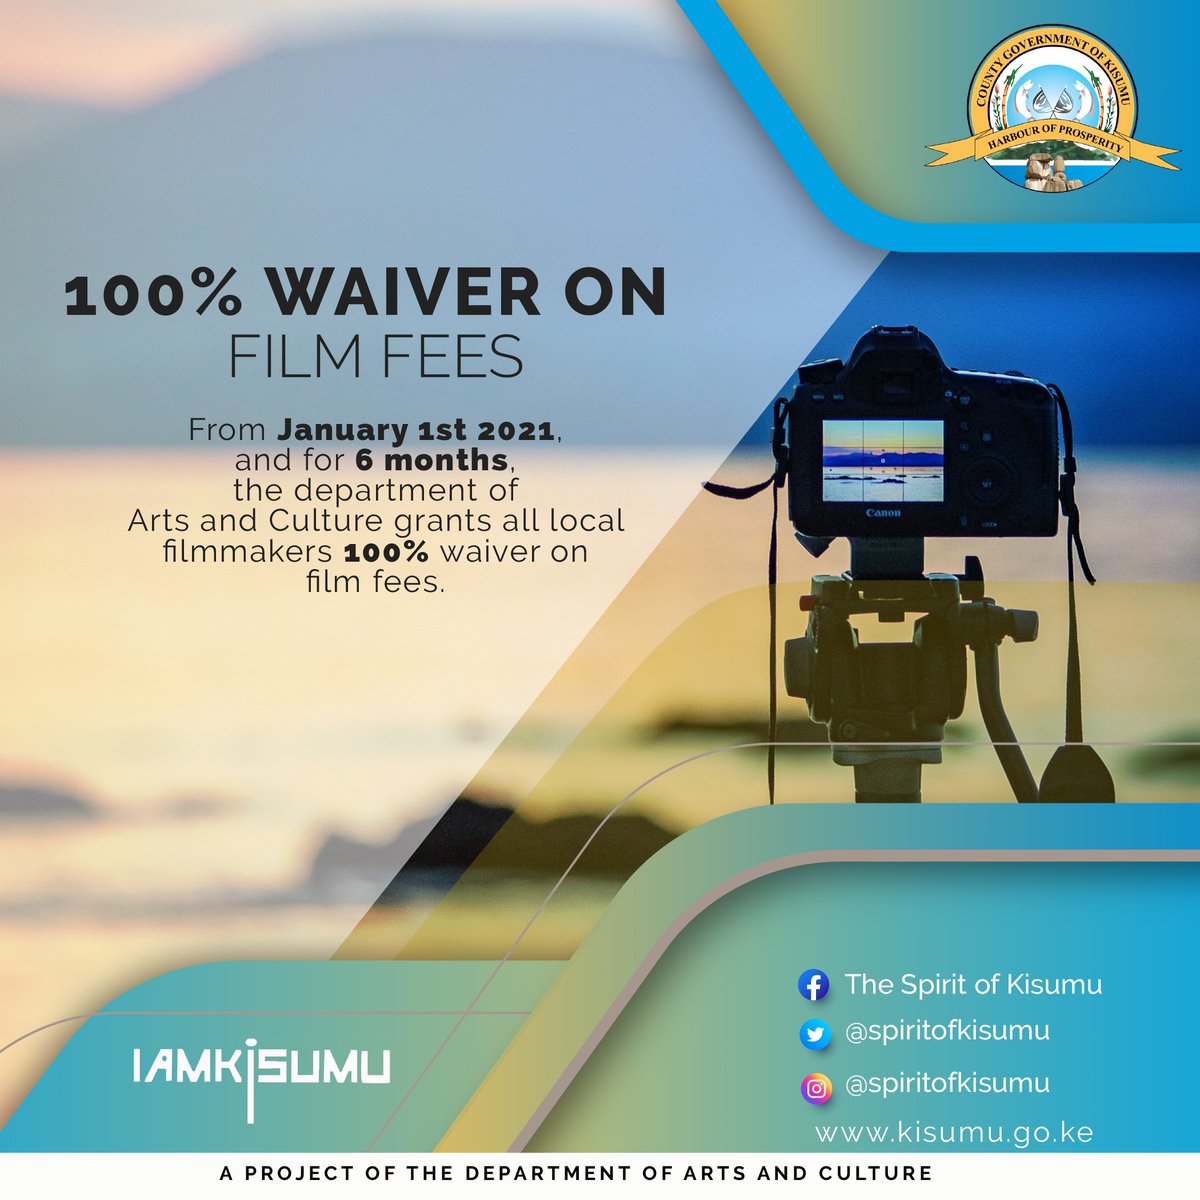 For the next 6 months, The County Government of Kisumu through the department of Arts and Culture grants all local filmmakers 100% waiver on film fees. #SpiritOfKisumu